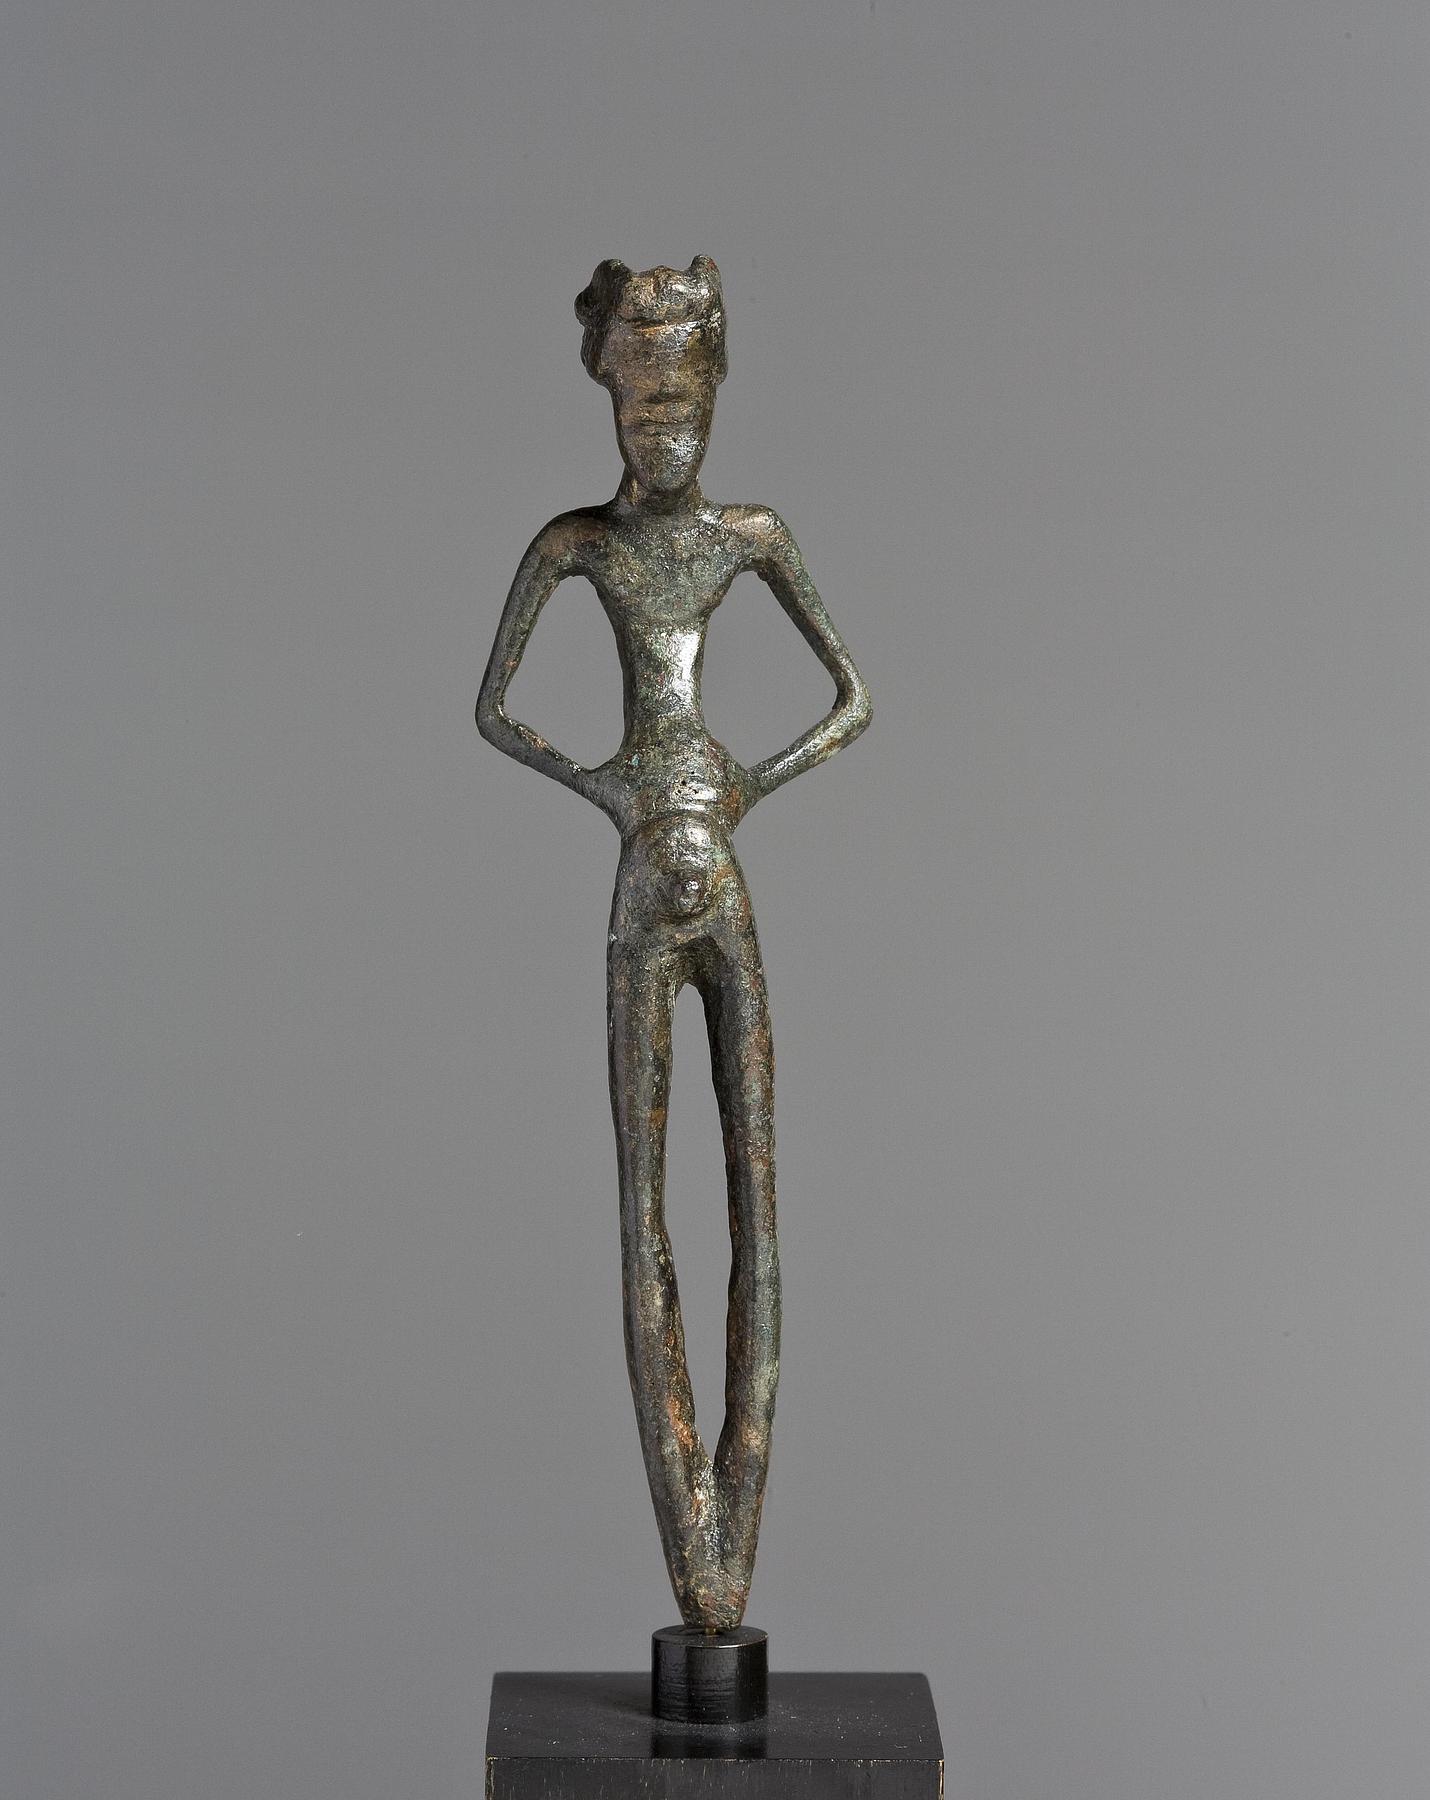 Handle from a ladle in the shape of Priapus, H2013